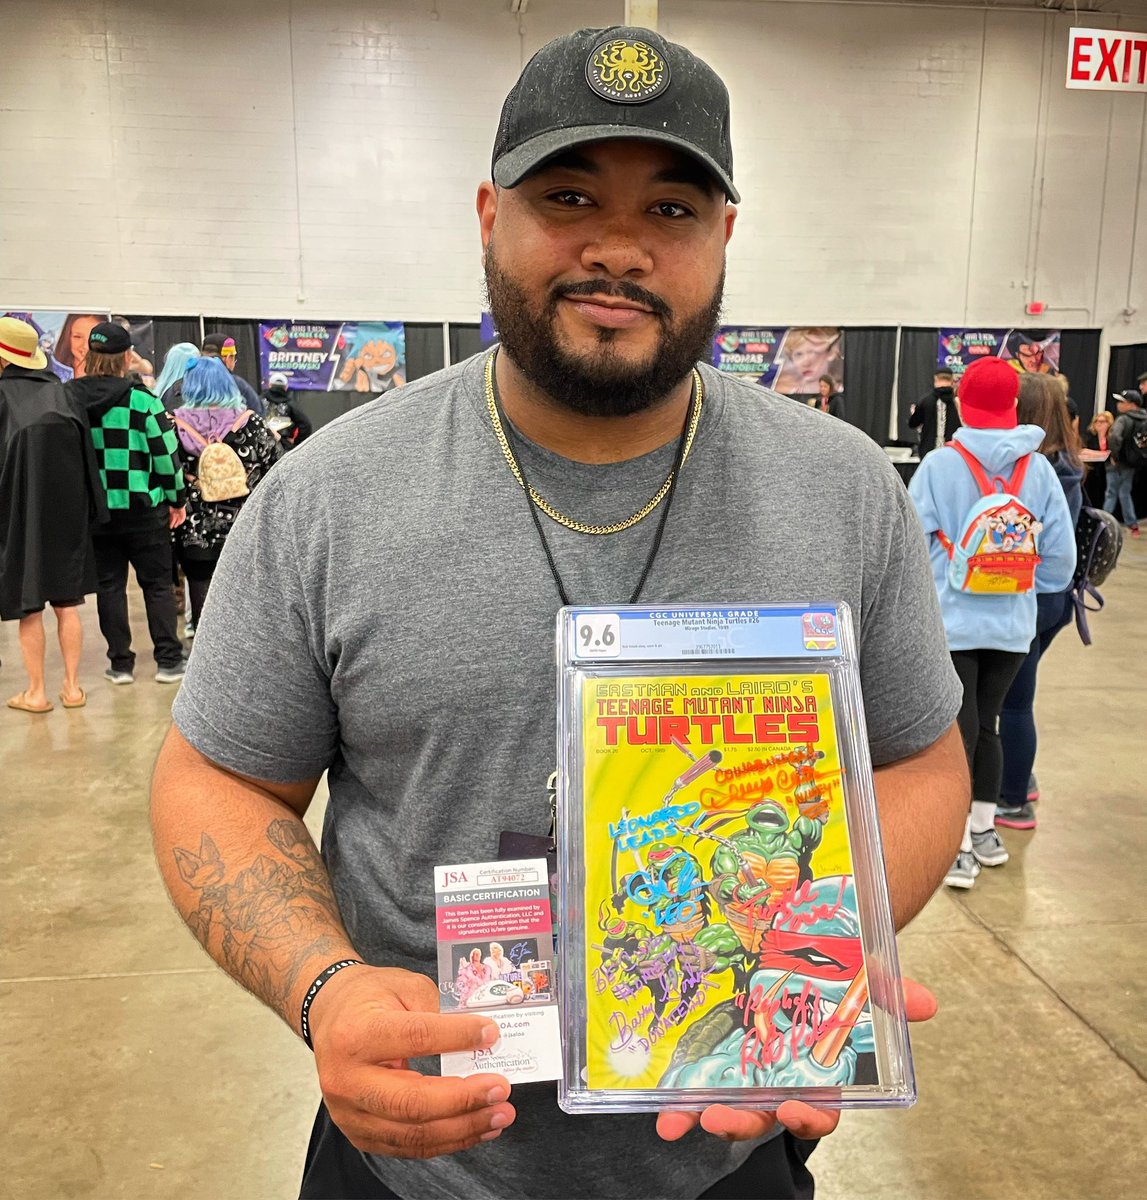 All the animated turtles on a #TMNT26 graded by @CGCComics now #JSAauthenticated on-site at @biglickcomiccon #NOVA

This is a flattering compromise for the verification of unwitnessed signatures, but we look forward to a more streamlined process with our new @CCGcertified family.